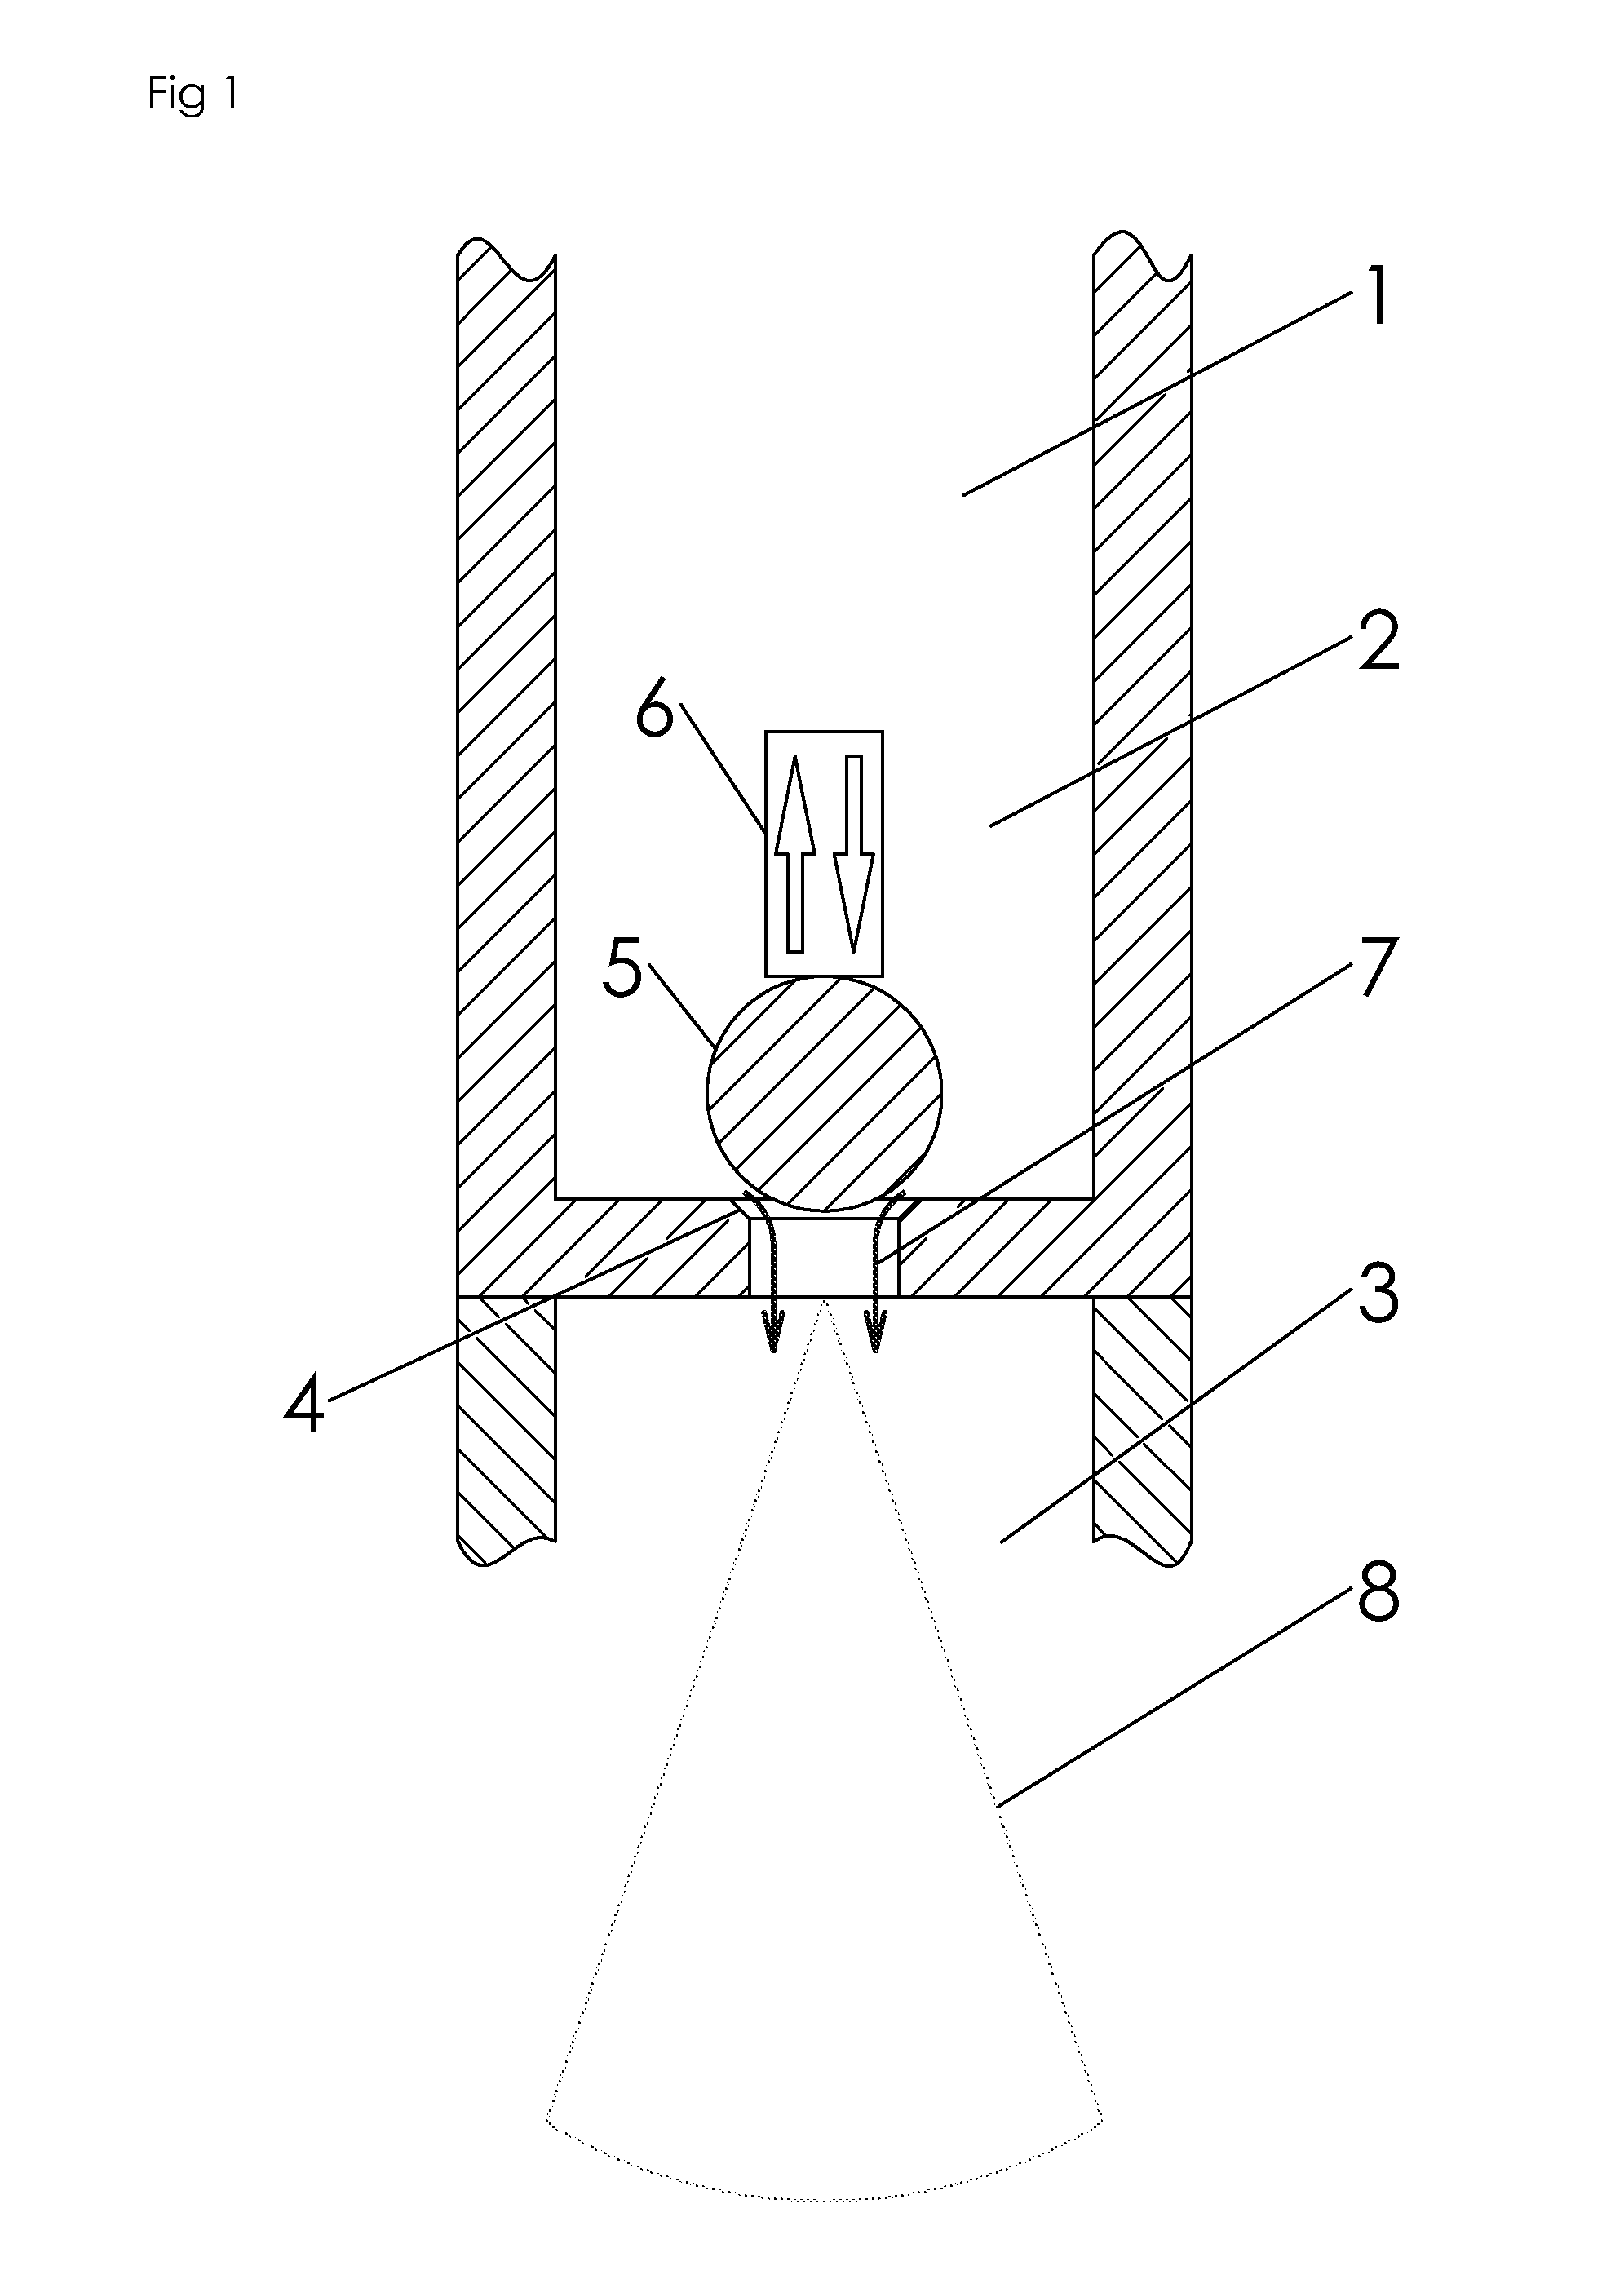 Electronically-controlled, high pressure flow control valve and method of use